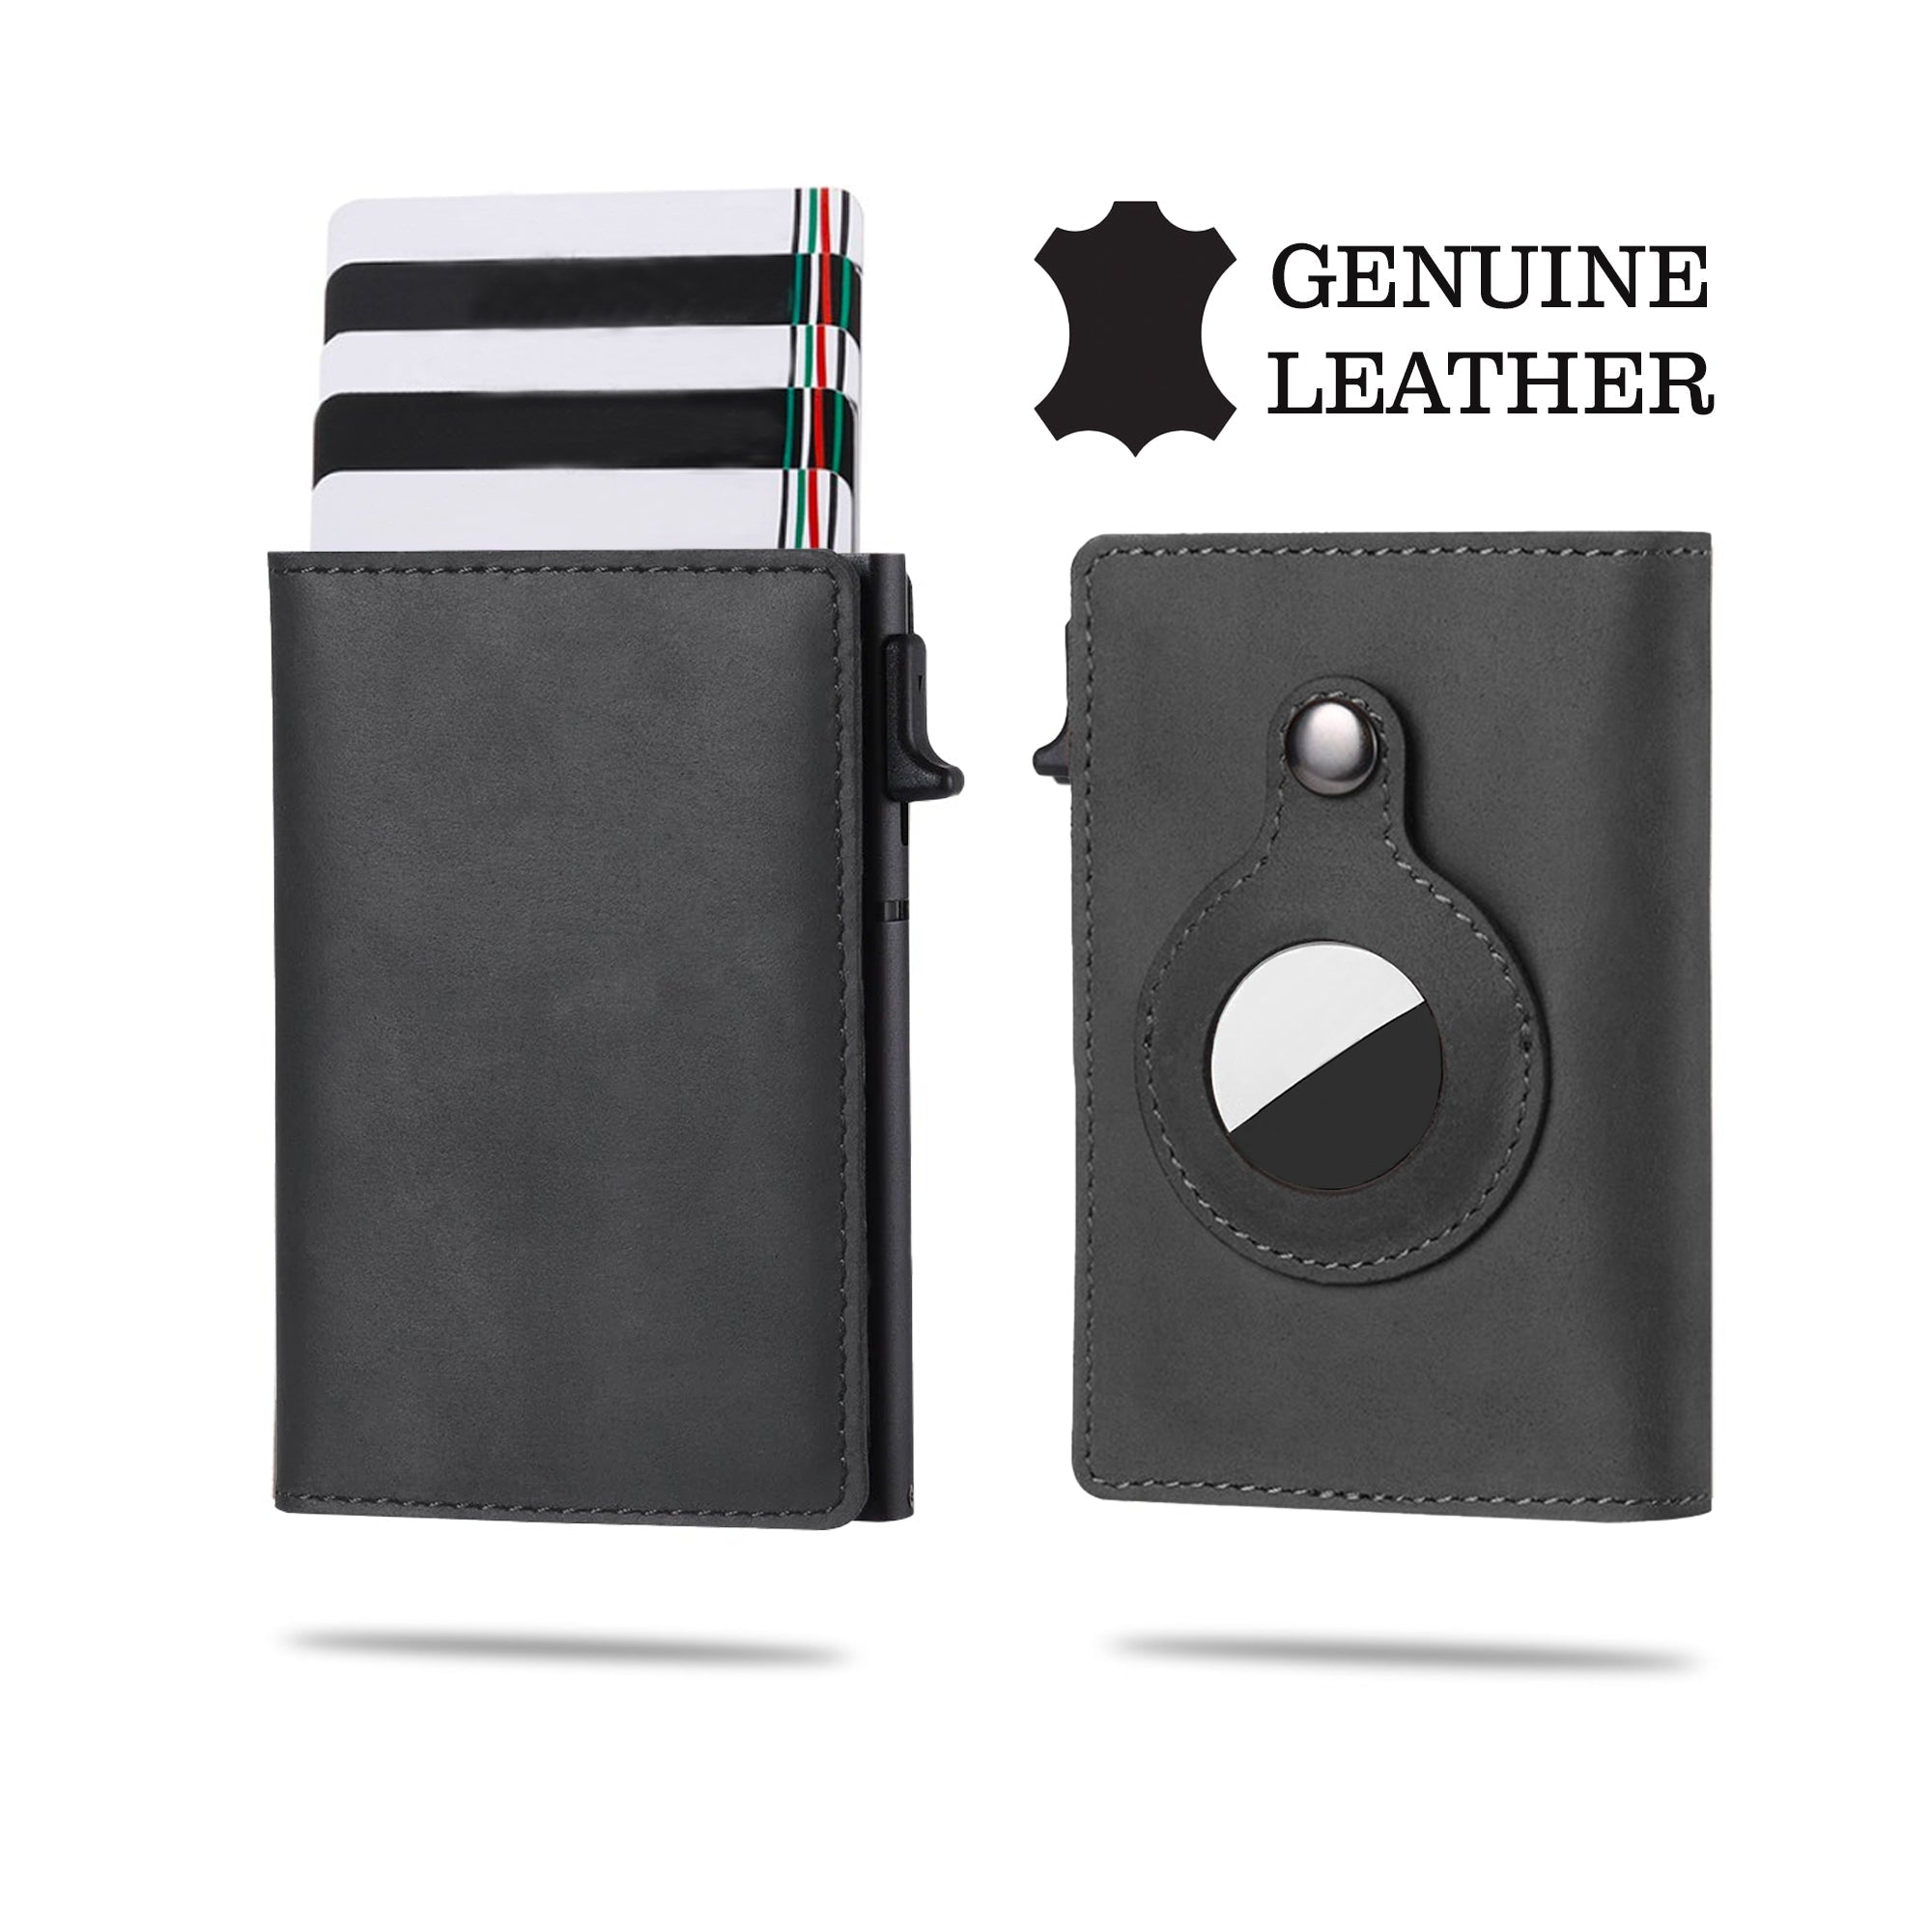 Airtag Wallet Genuine Leather Credit Card Money Holder Case Air Tag Cover  Gift